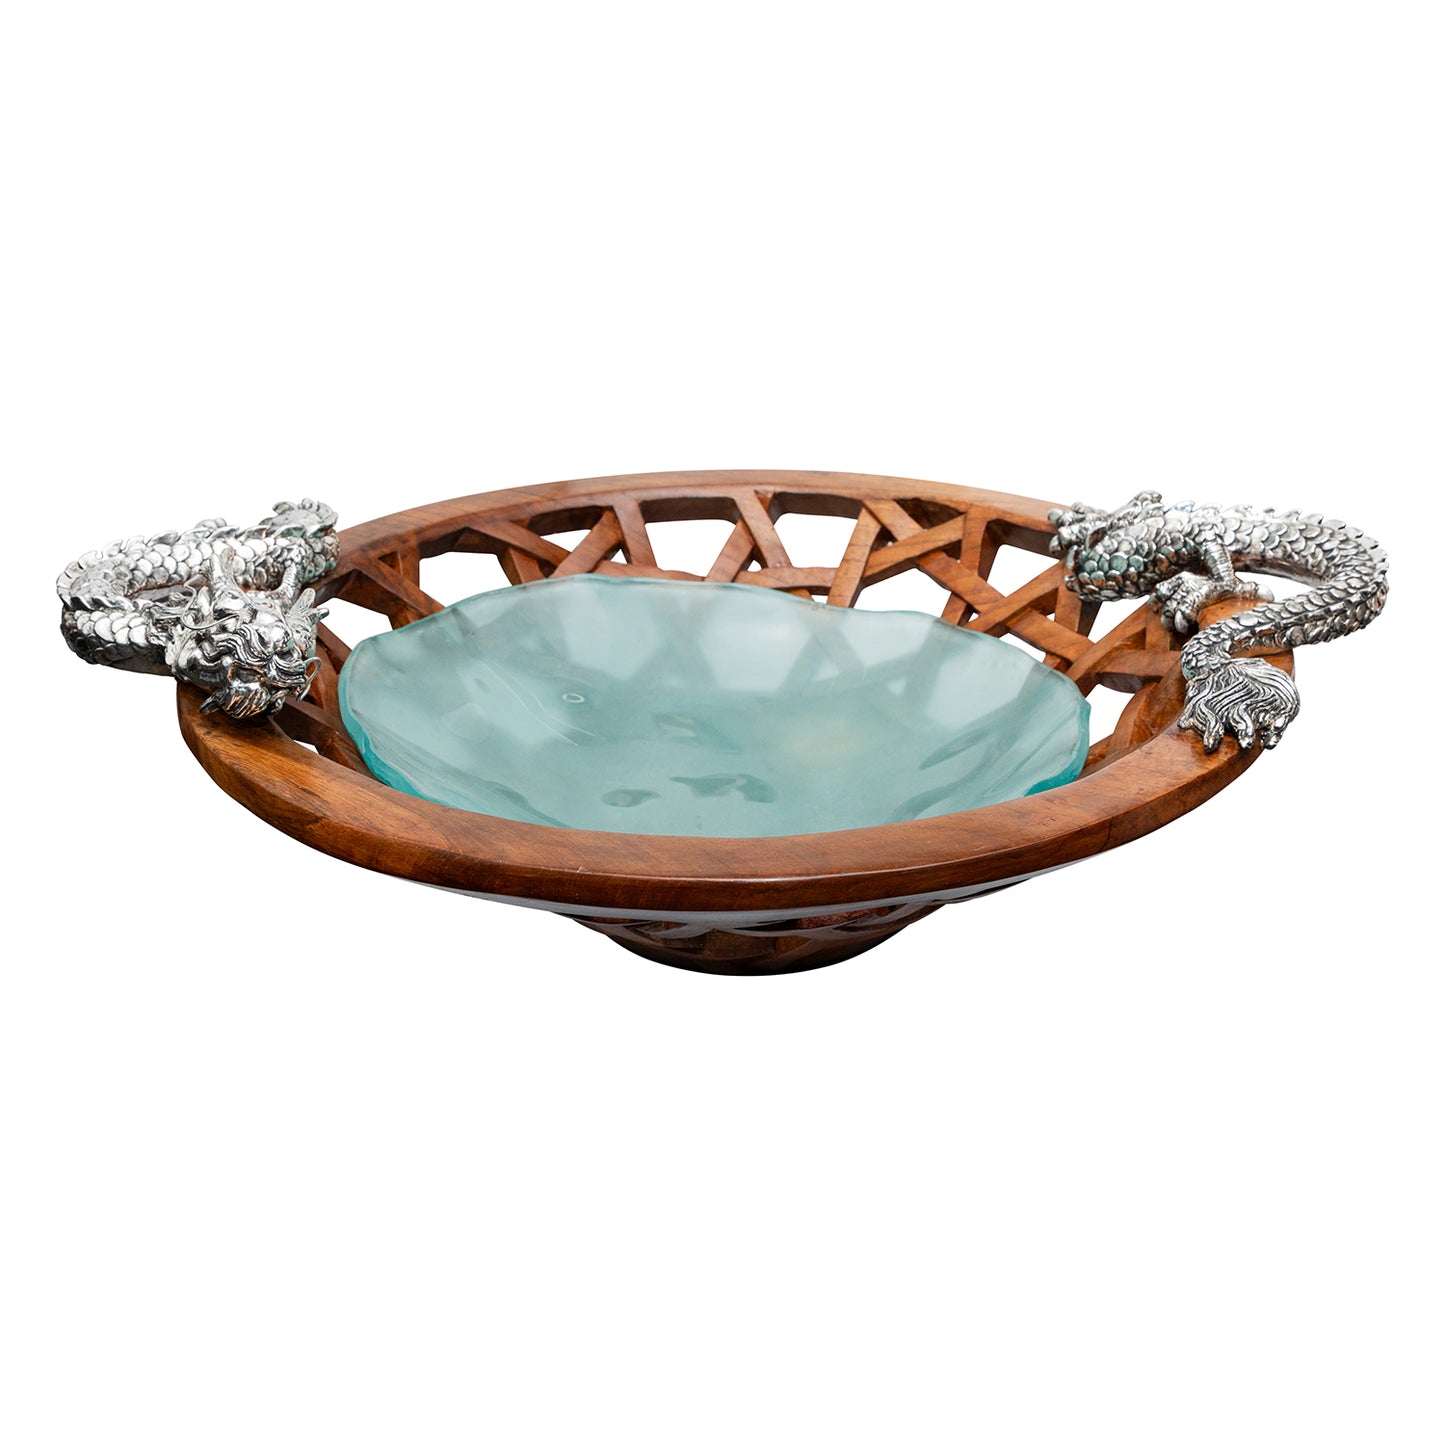 Woven Wood Bowl with Silver Water Dragon